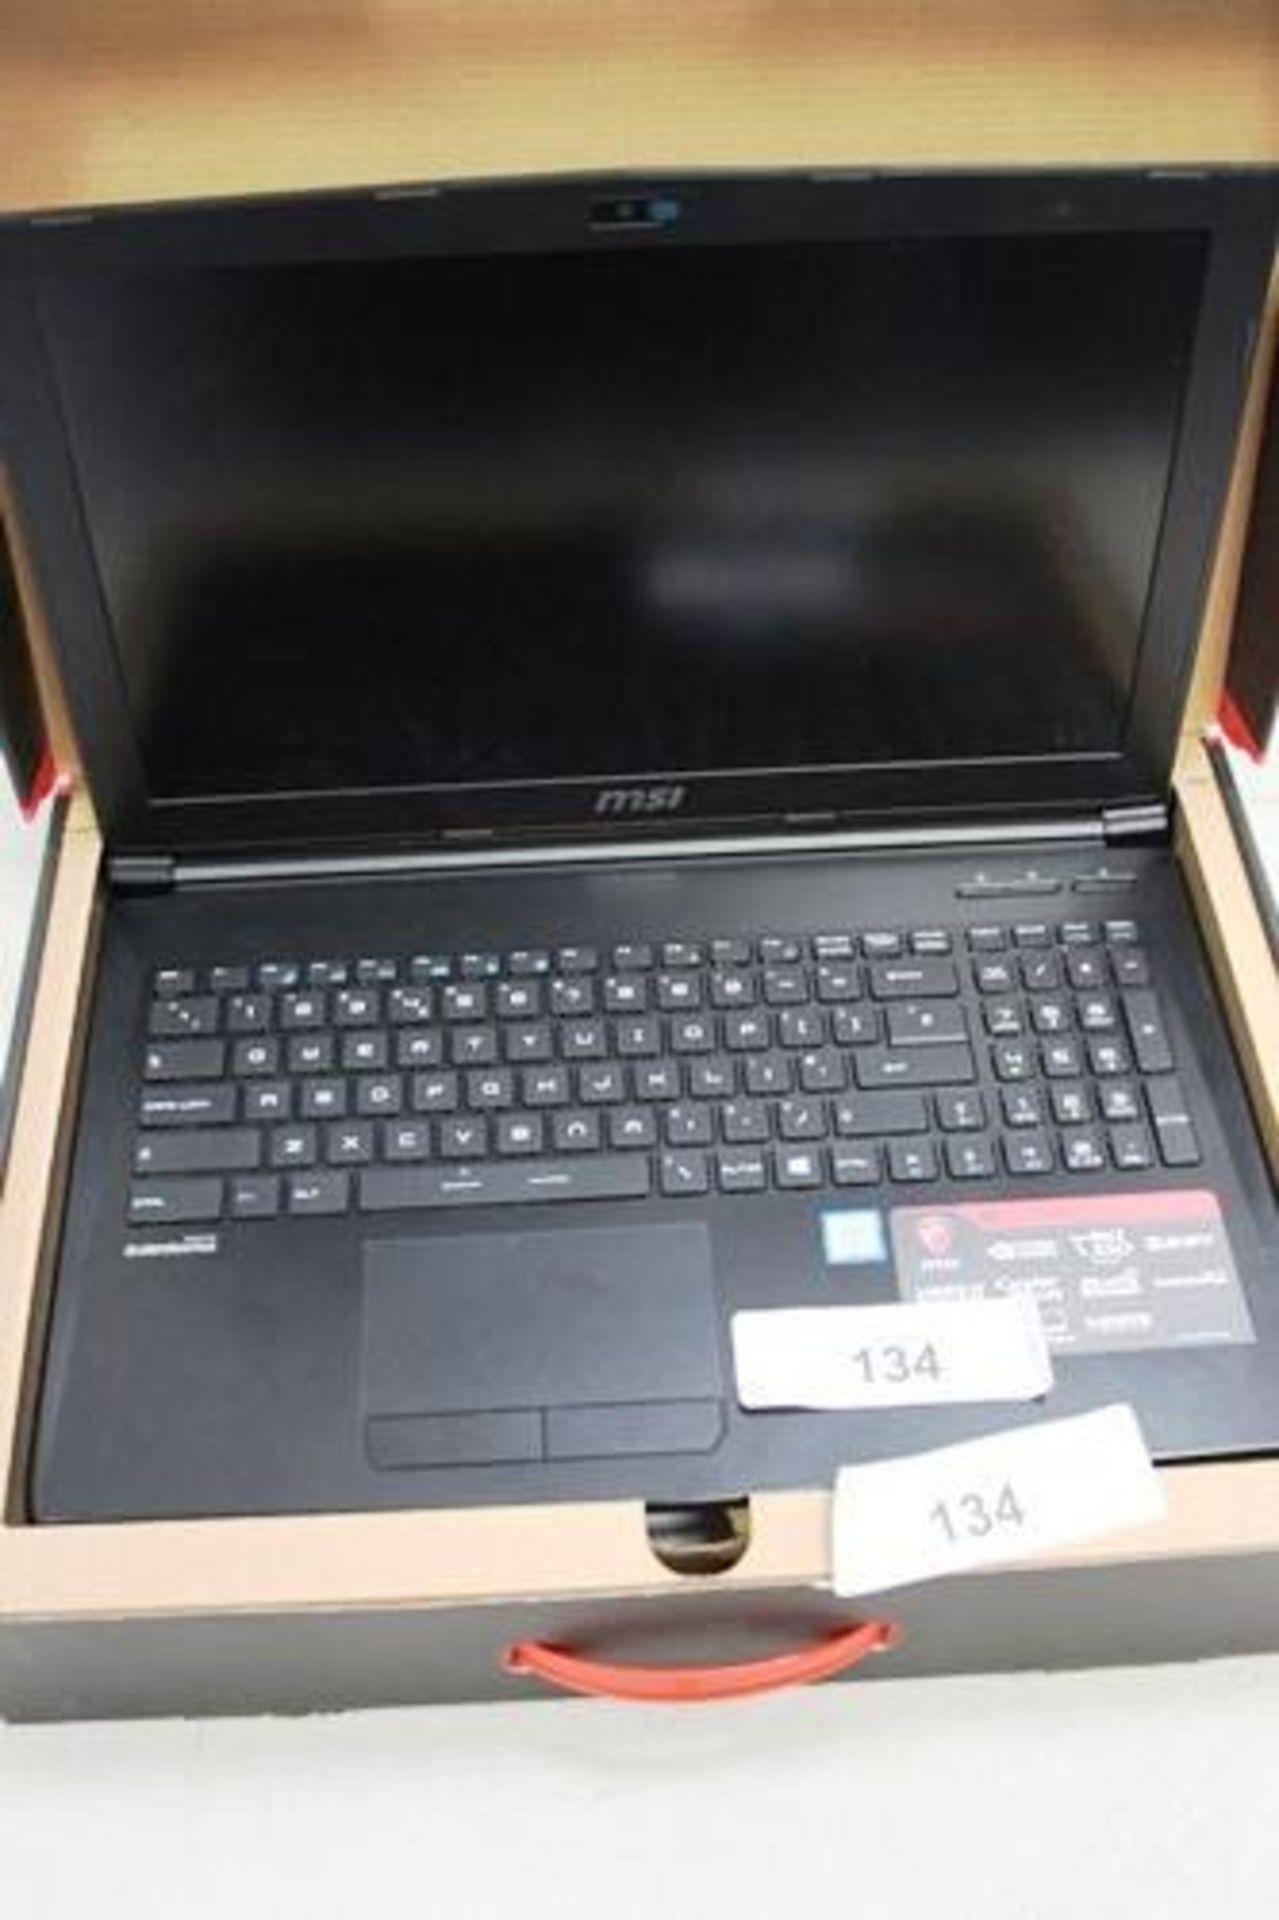 1 x MSI GL62 gaming laptop, model 9S7-16J612-0.7, hard drive removed - Spares and repairs, - Image 2 of 2